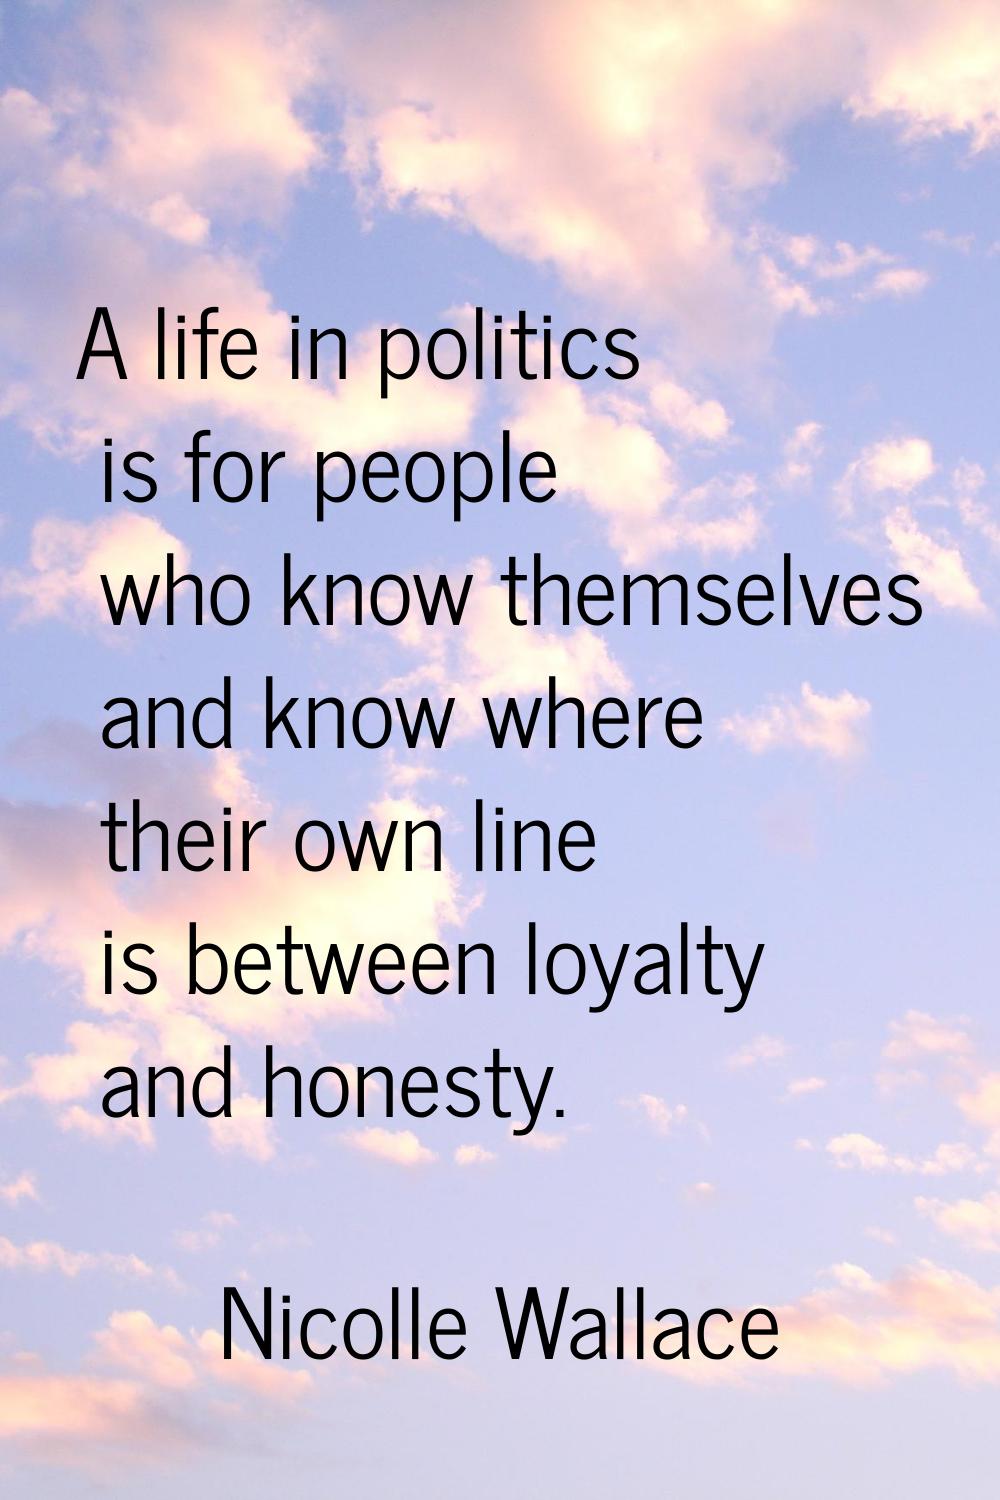 A life in politics is for people who know themselves and know where their own line is between loyal